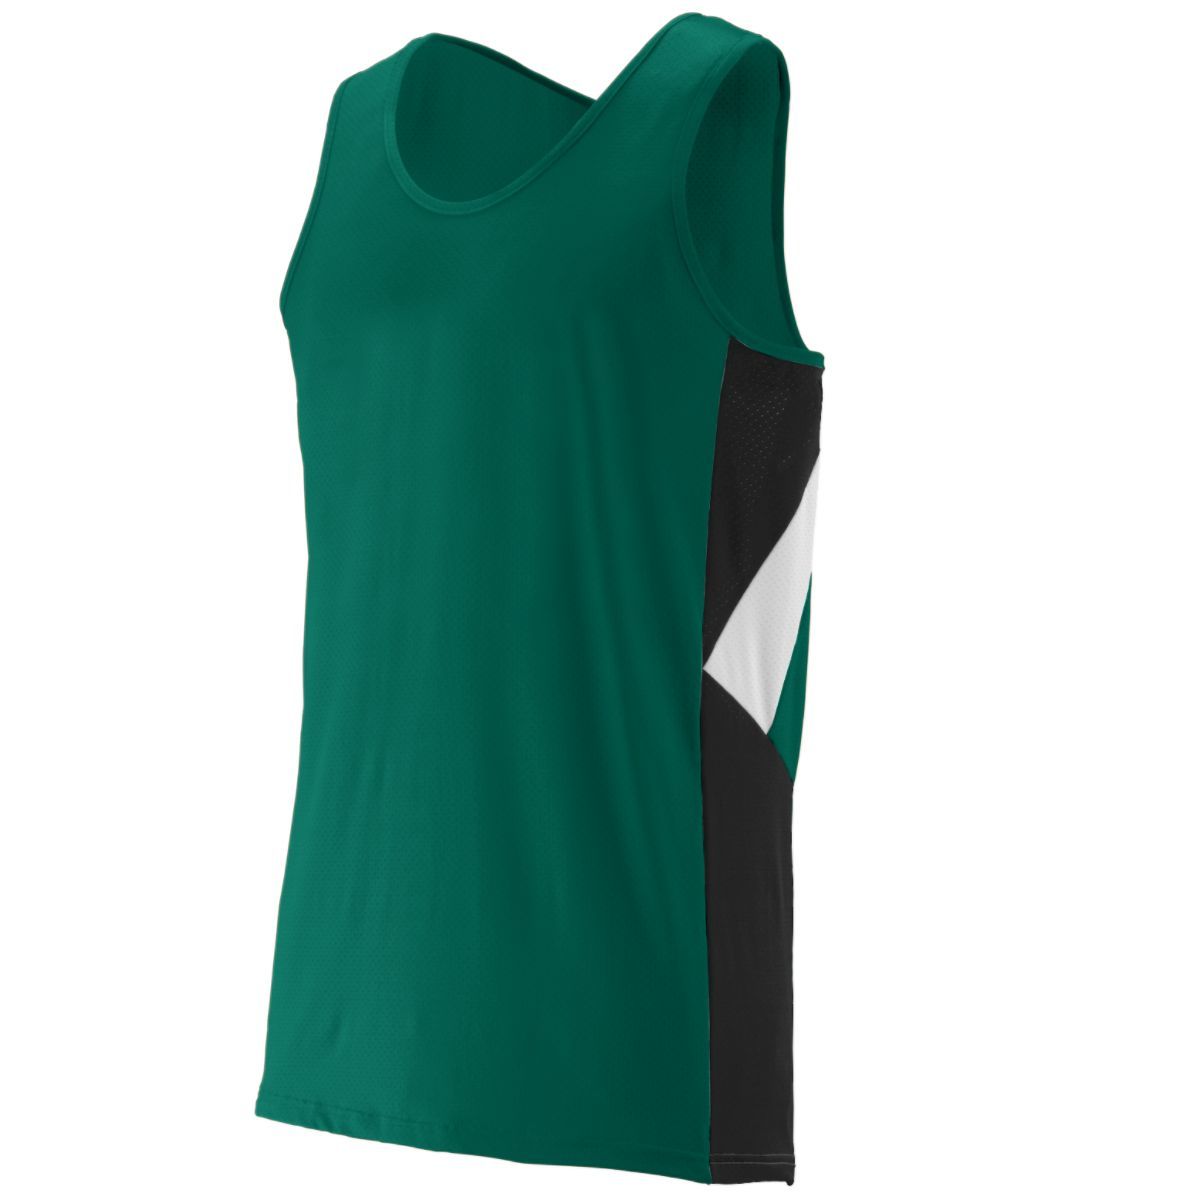 Augusta Sportswear Sprint Jersey in Dark Green/Black/White  -Part of the Adult, Adult-Jersey, Augusta-Products, Track-Field, Shirts product lines at KanaleyCreations.com